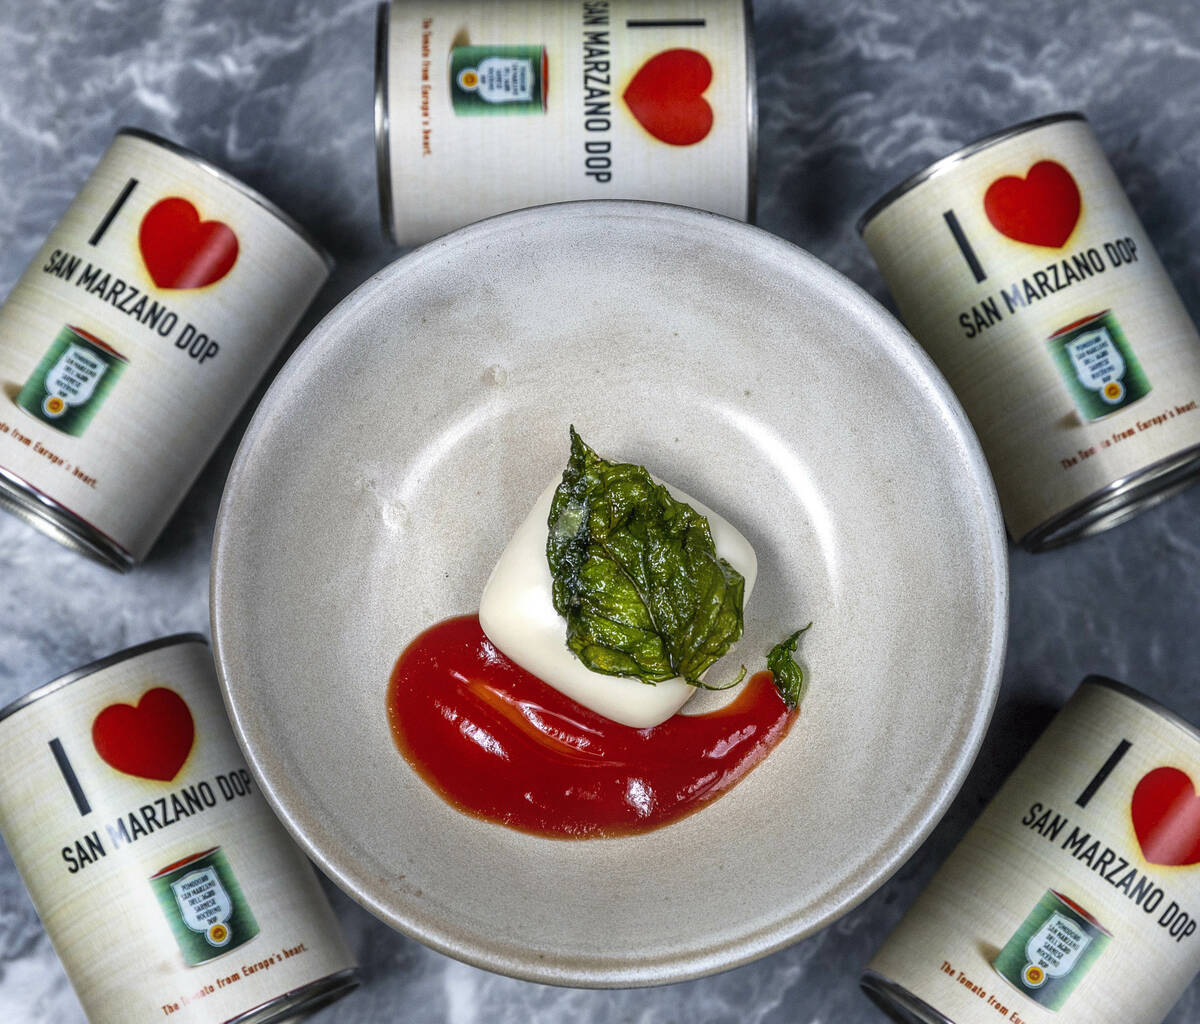 Panna cotta made with San Marzano DOP tomatoes at Toscana Ristorante in Eataly on Wednesday, Ja ...